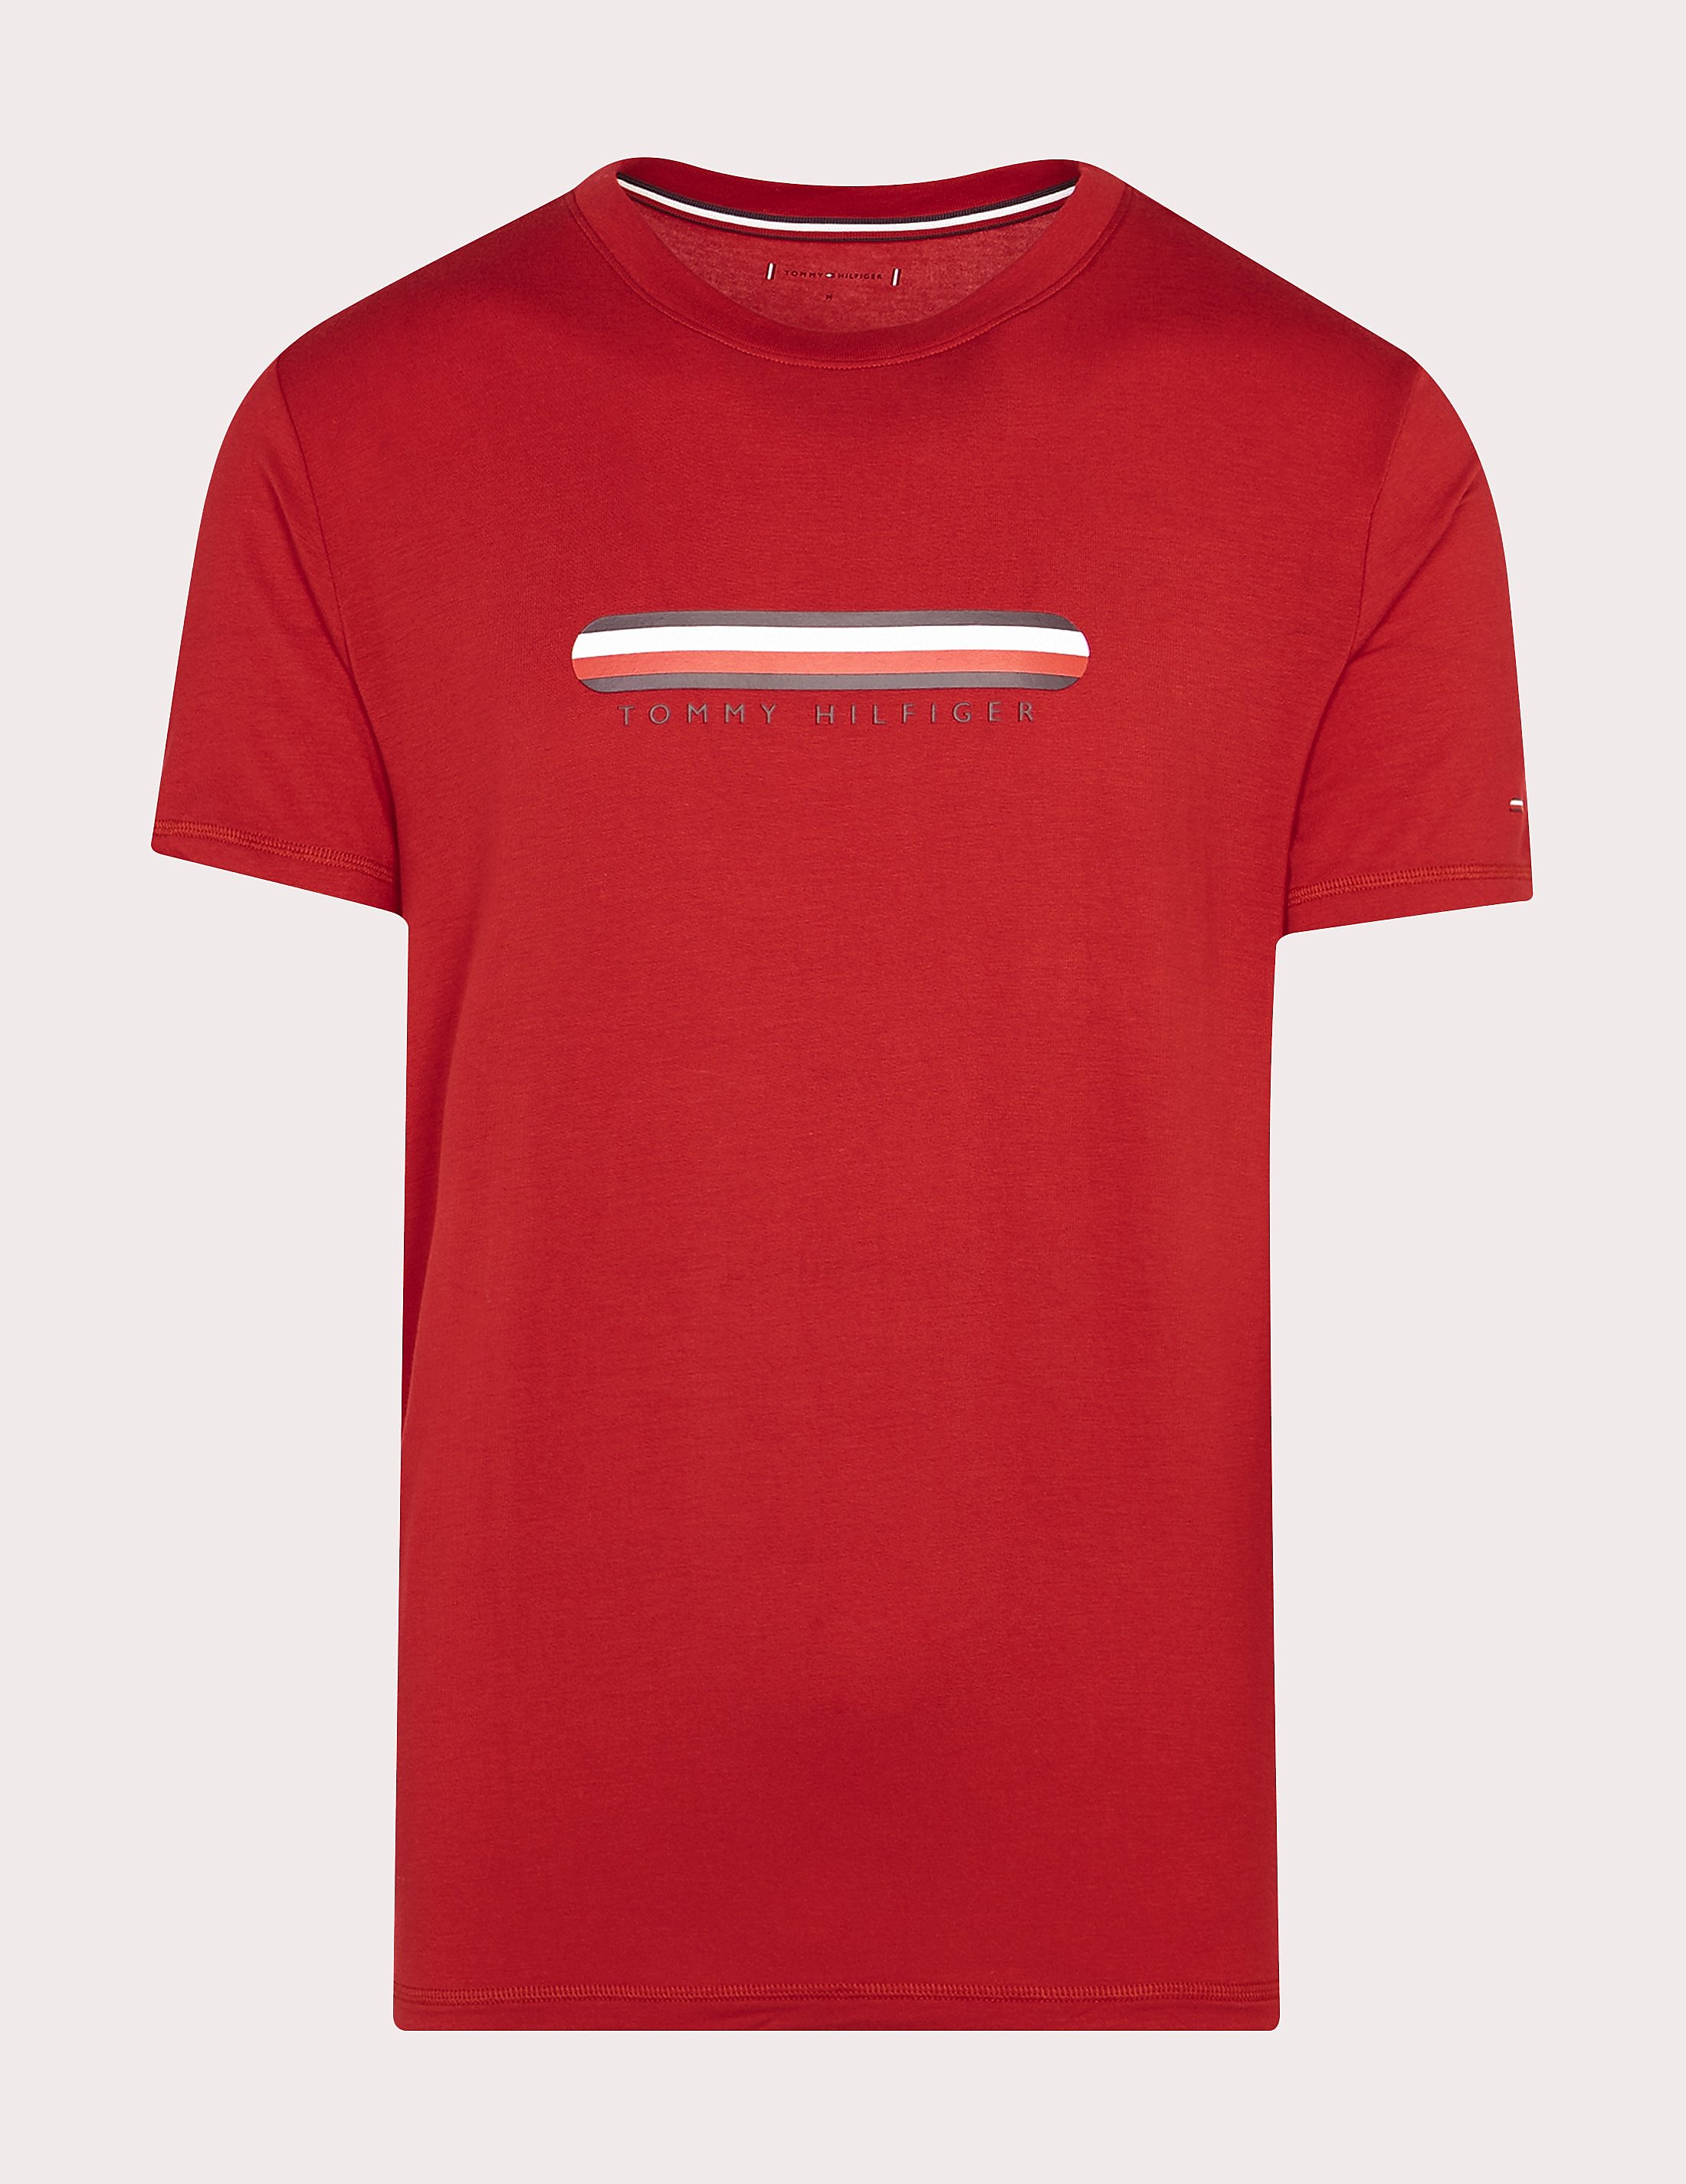 Men's Tommy Hilfiger Lounge SeaCell Stripe T-Shirt Red, Red product